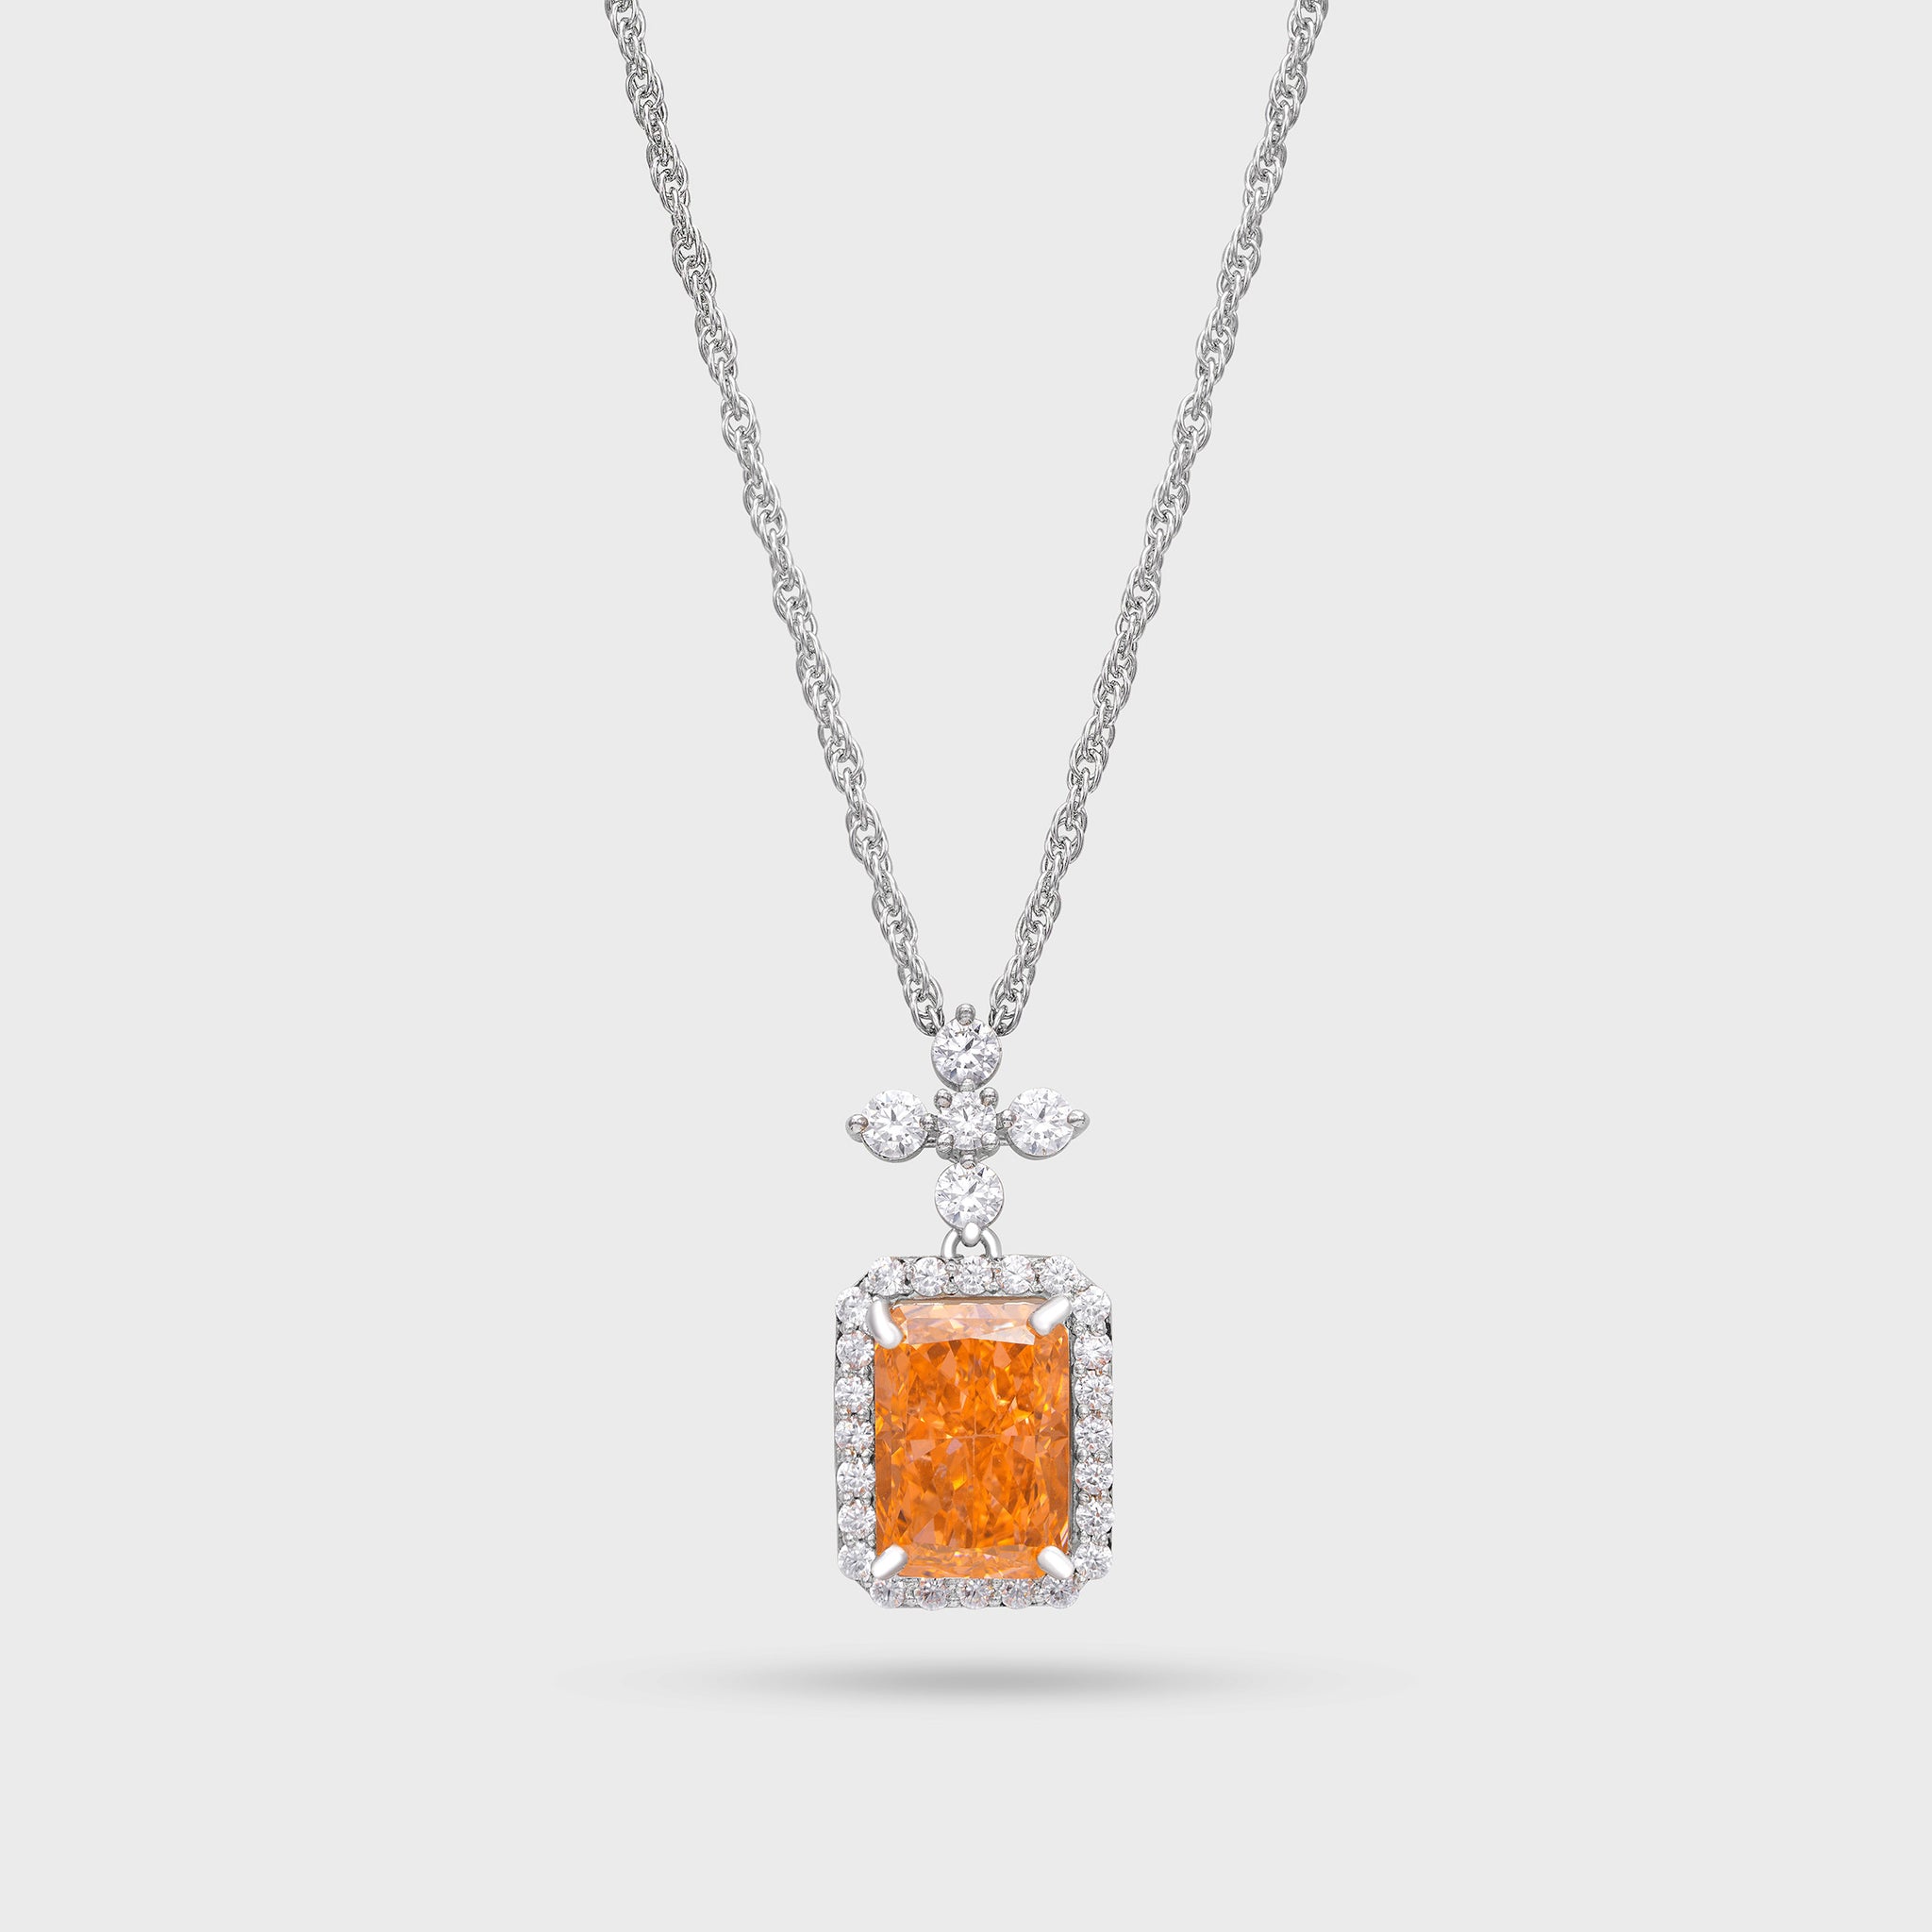 Halo Set Natural Radiant Cut Gemstone Pendant With Unique Rope Chain In 925 Sterling Silver